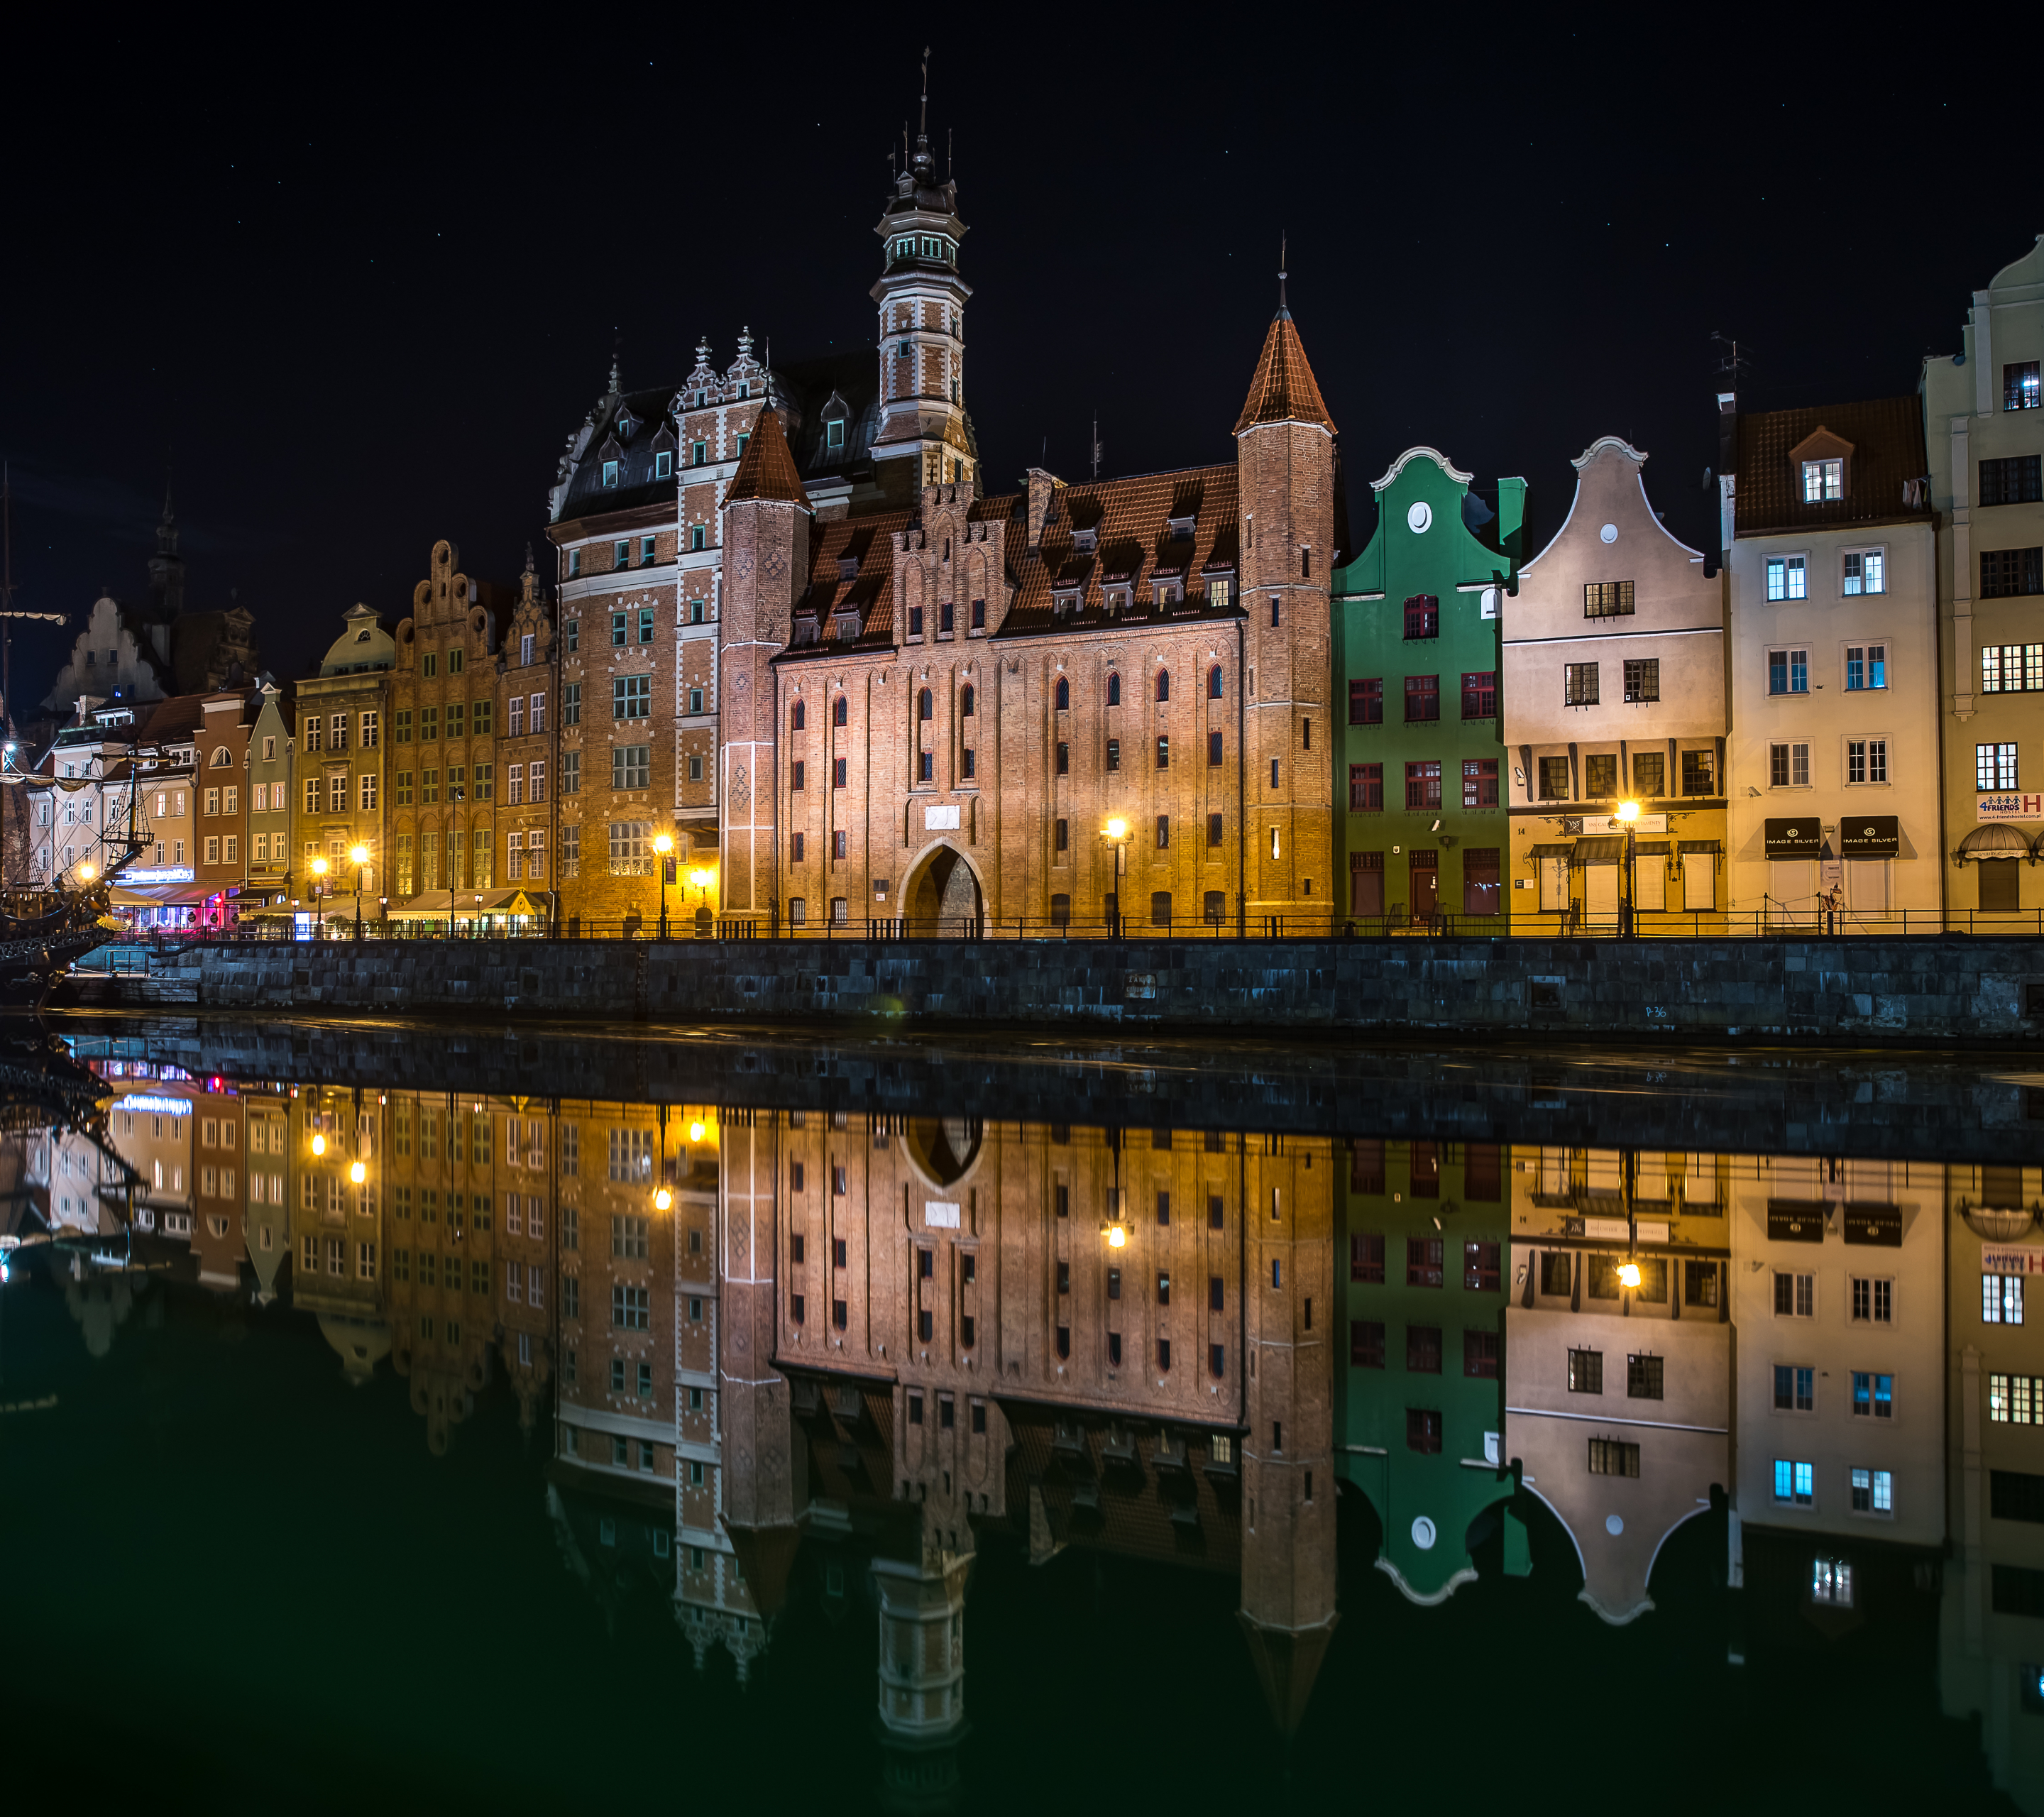 man made, gdansk, river, reflection, poland, light, town, night, towns